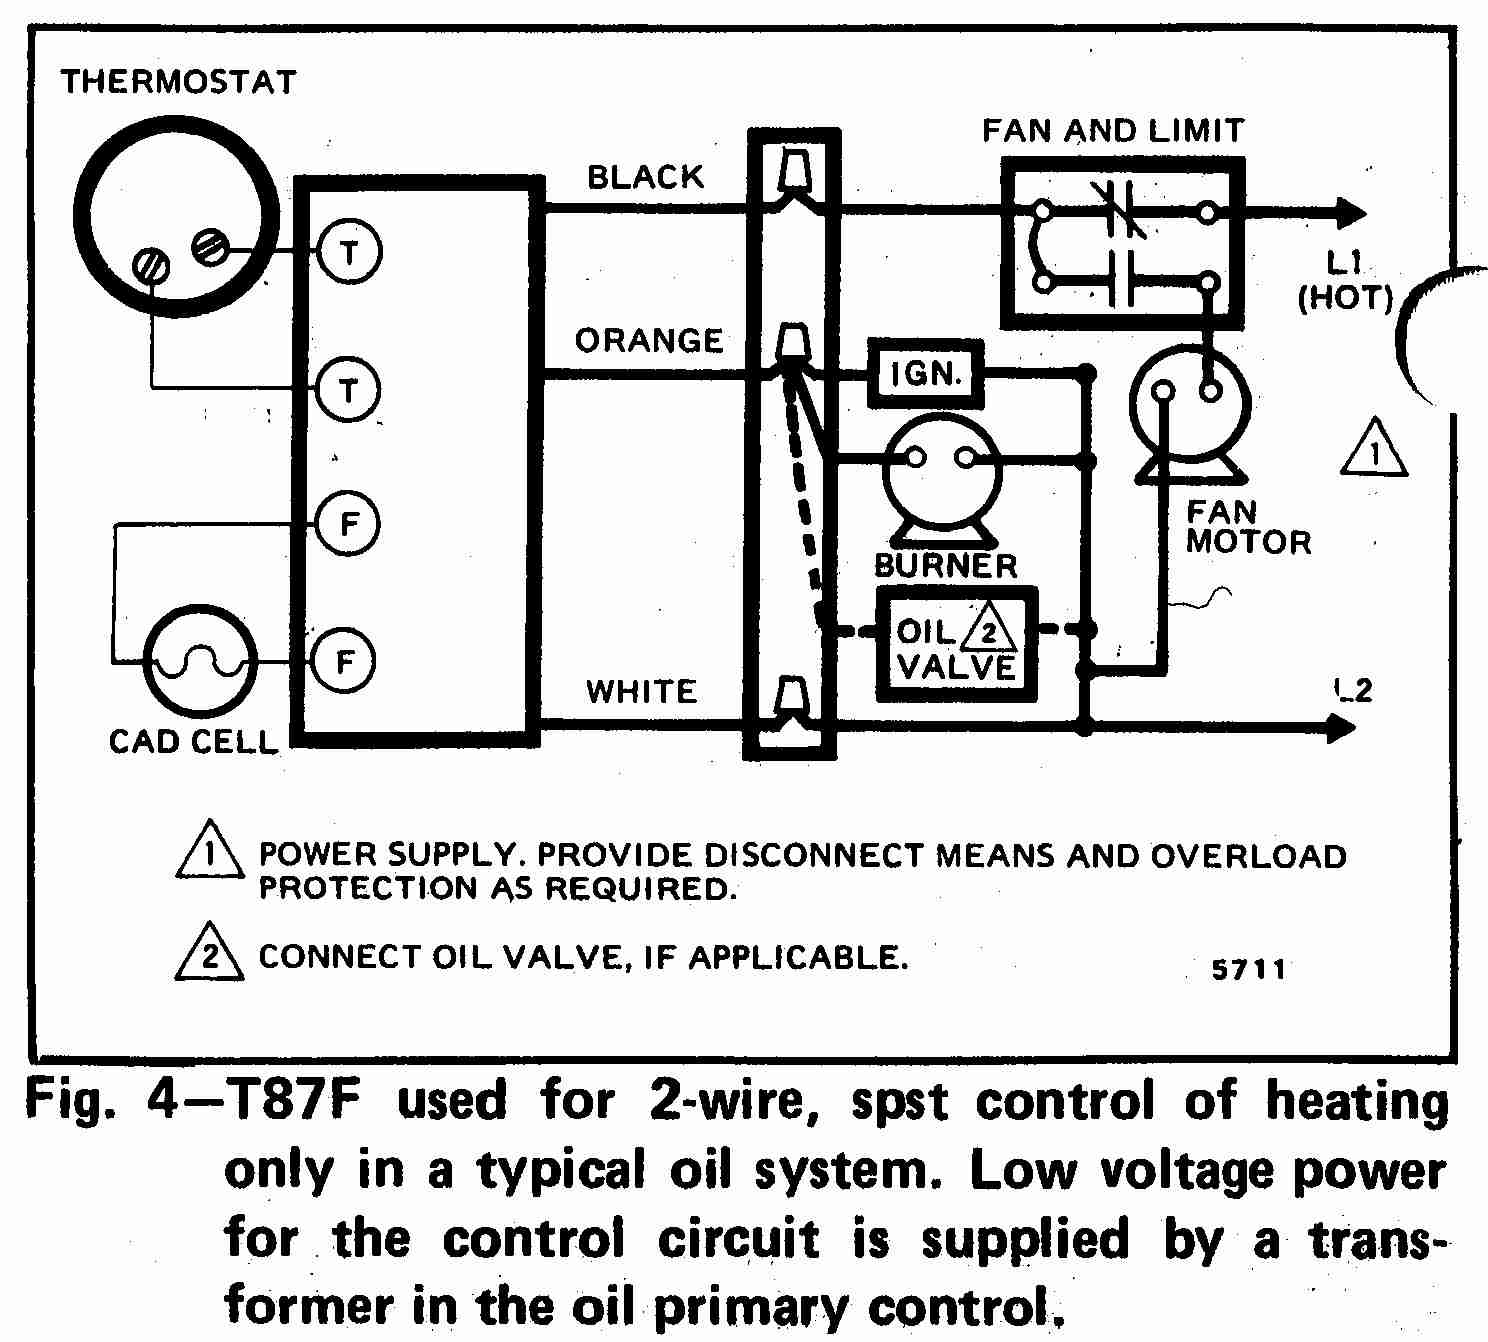 Room Thermostat Wiring Diagrams For Hvac Systems - Honeywell Wiring Diagram